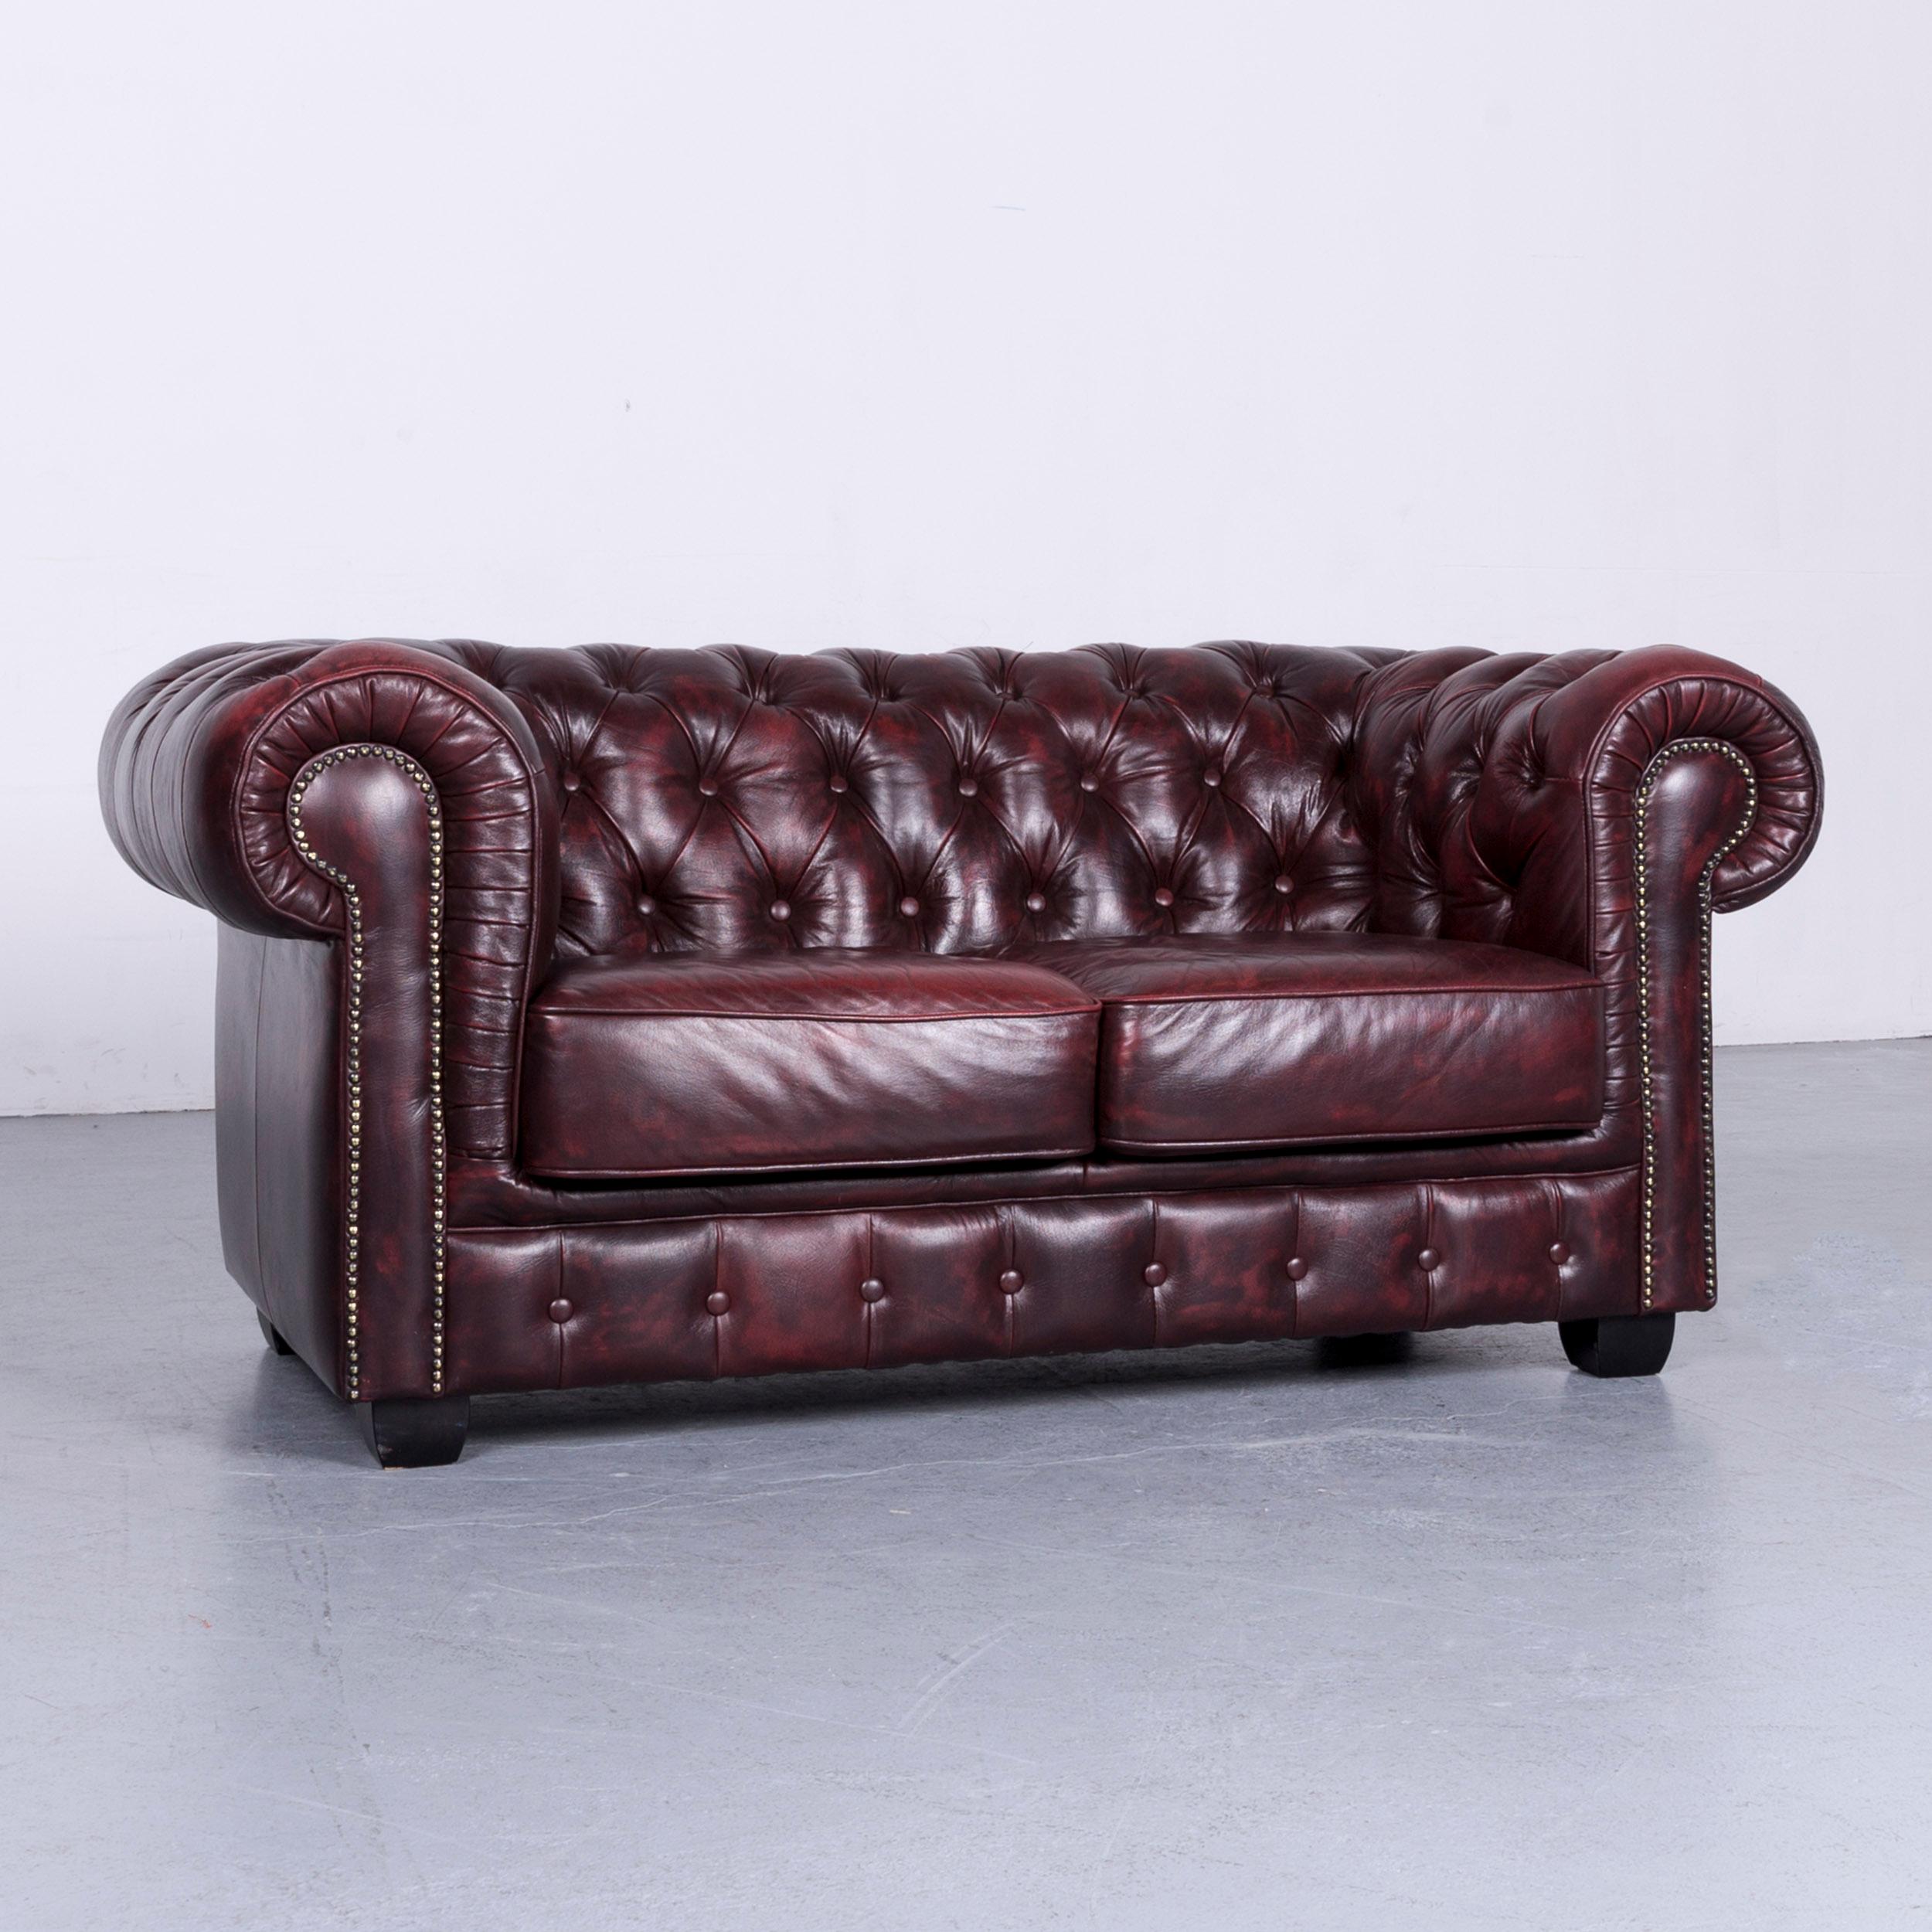 Chesterfield Leather Sofa Brown Three-Seat Couch Vintage Retro 8